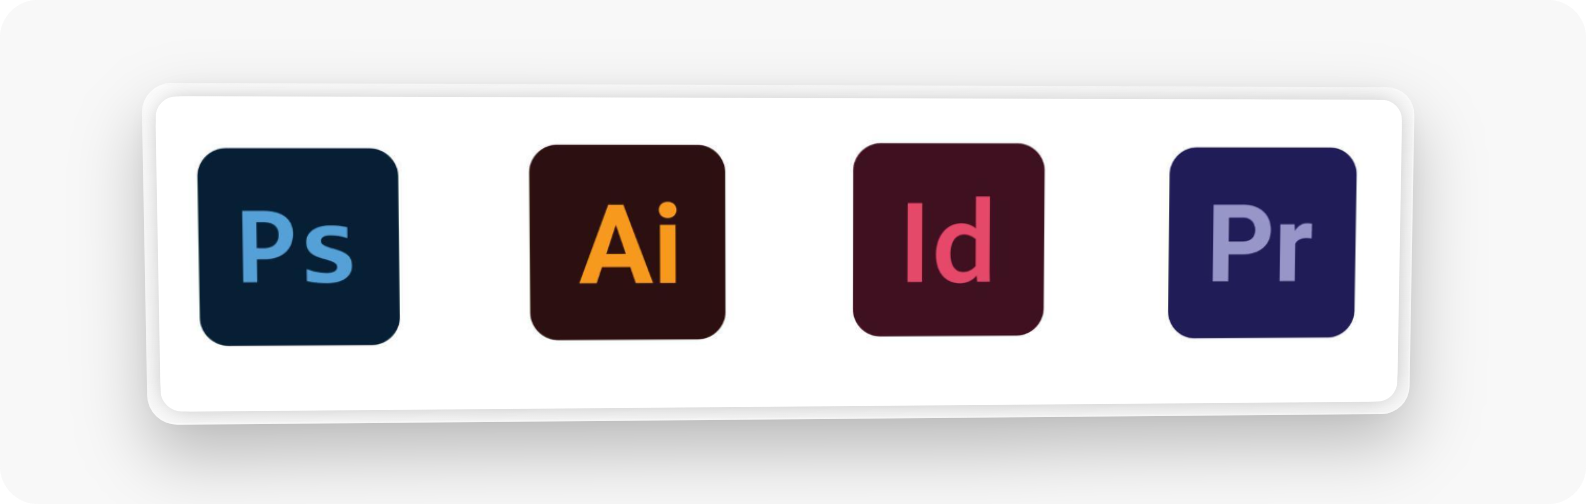 Image of the Adobe Creative Suite Logos - Credit to: Godline Art